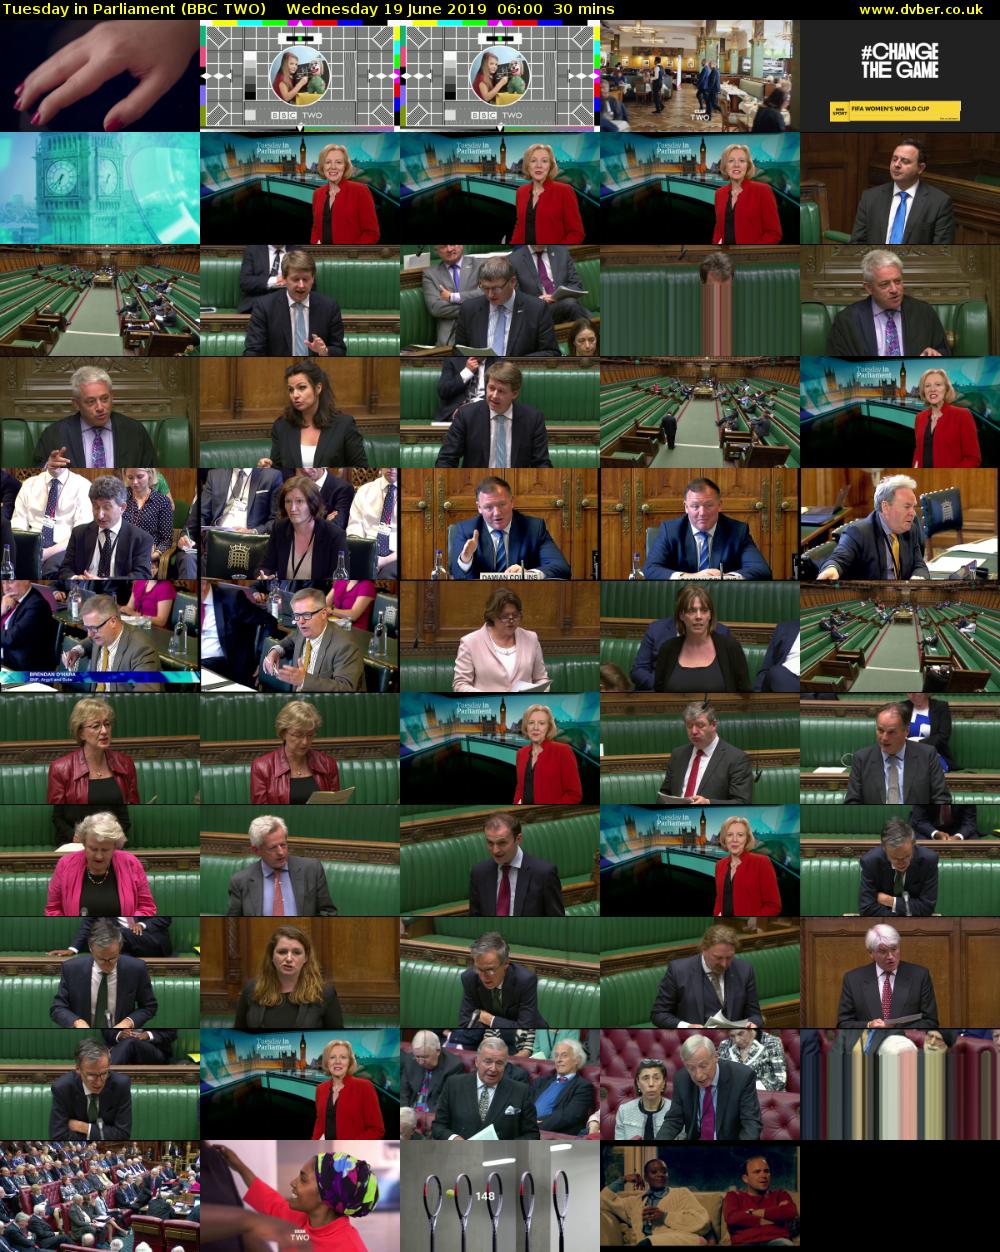 Tuesday in Parliament (BBC TWO) Wednesday 19 June 2019 06:00 - 06:30